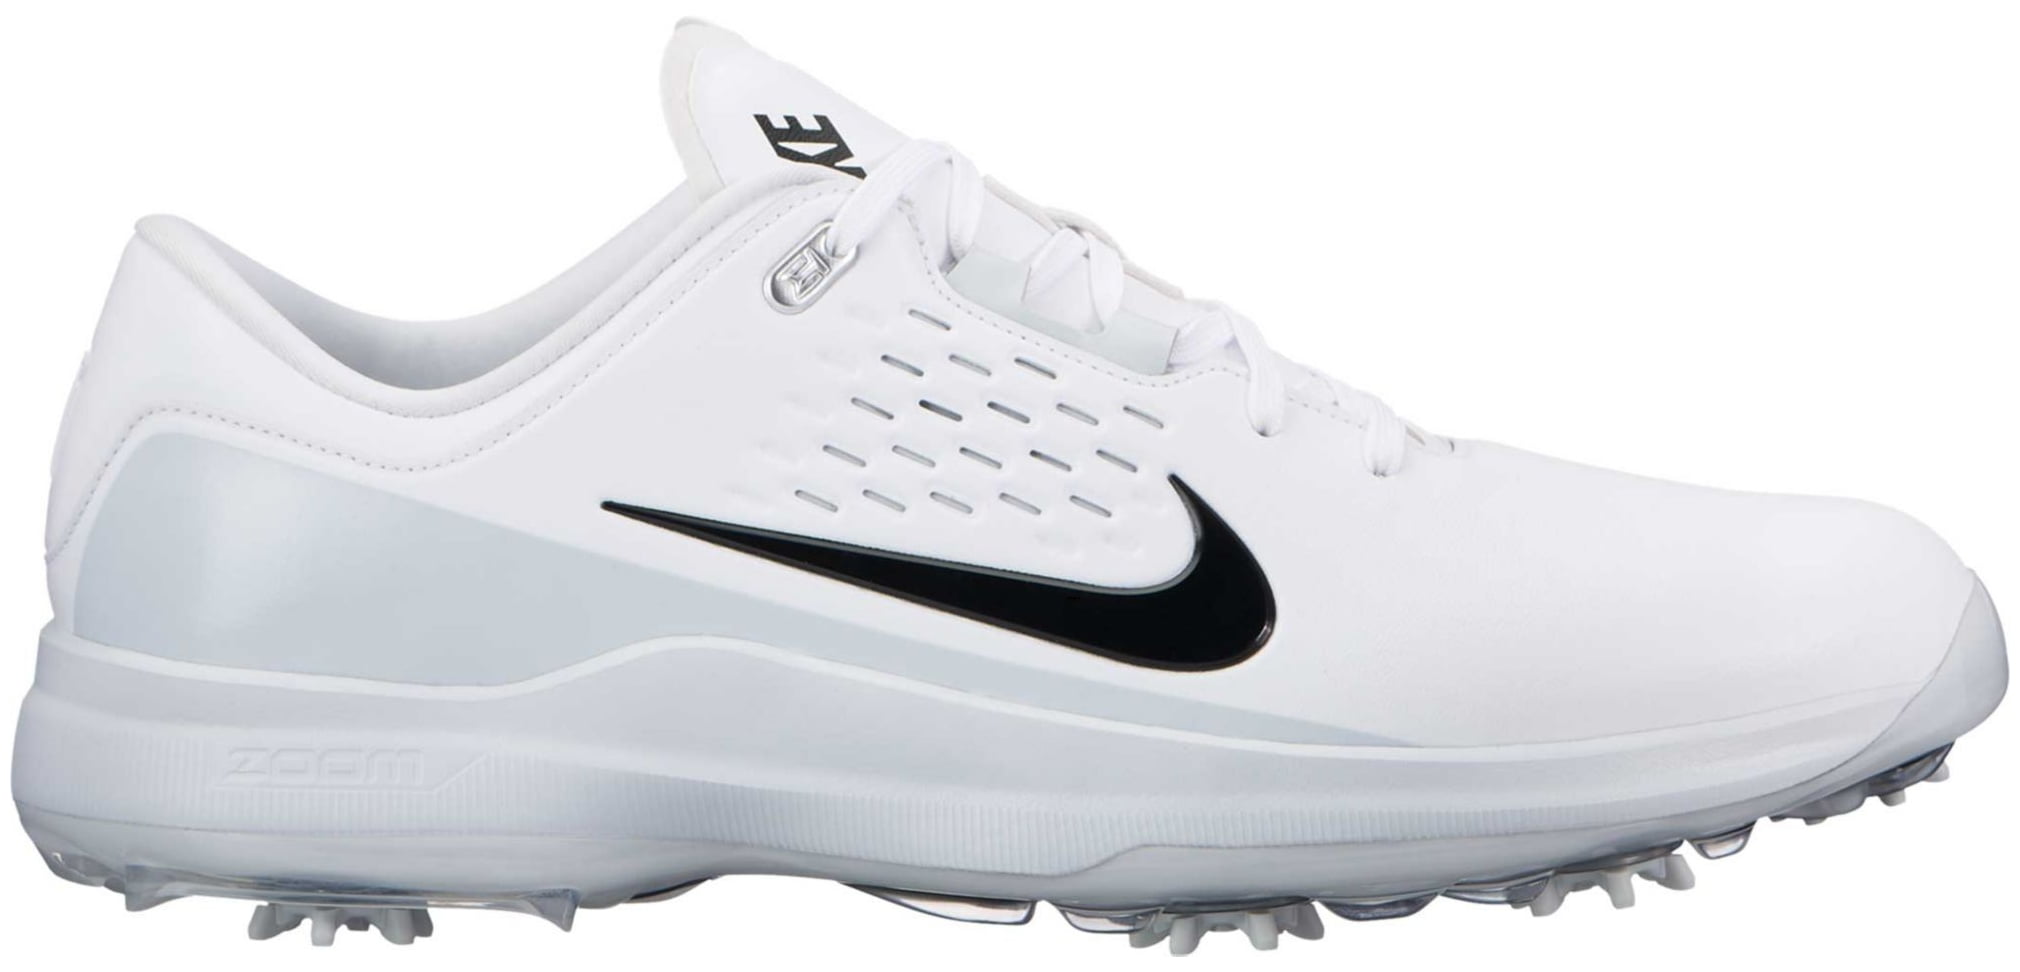 nike tw 19 golf shoes